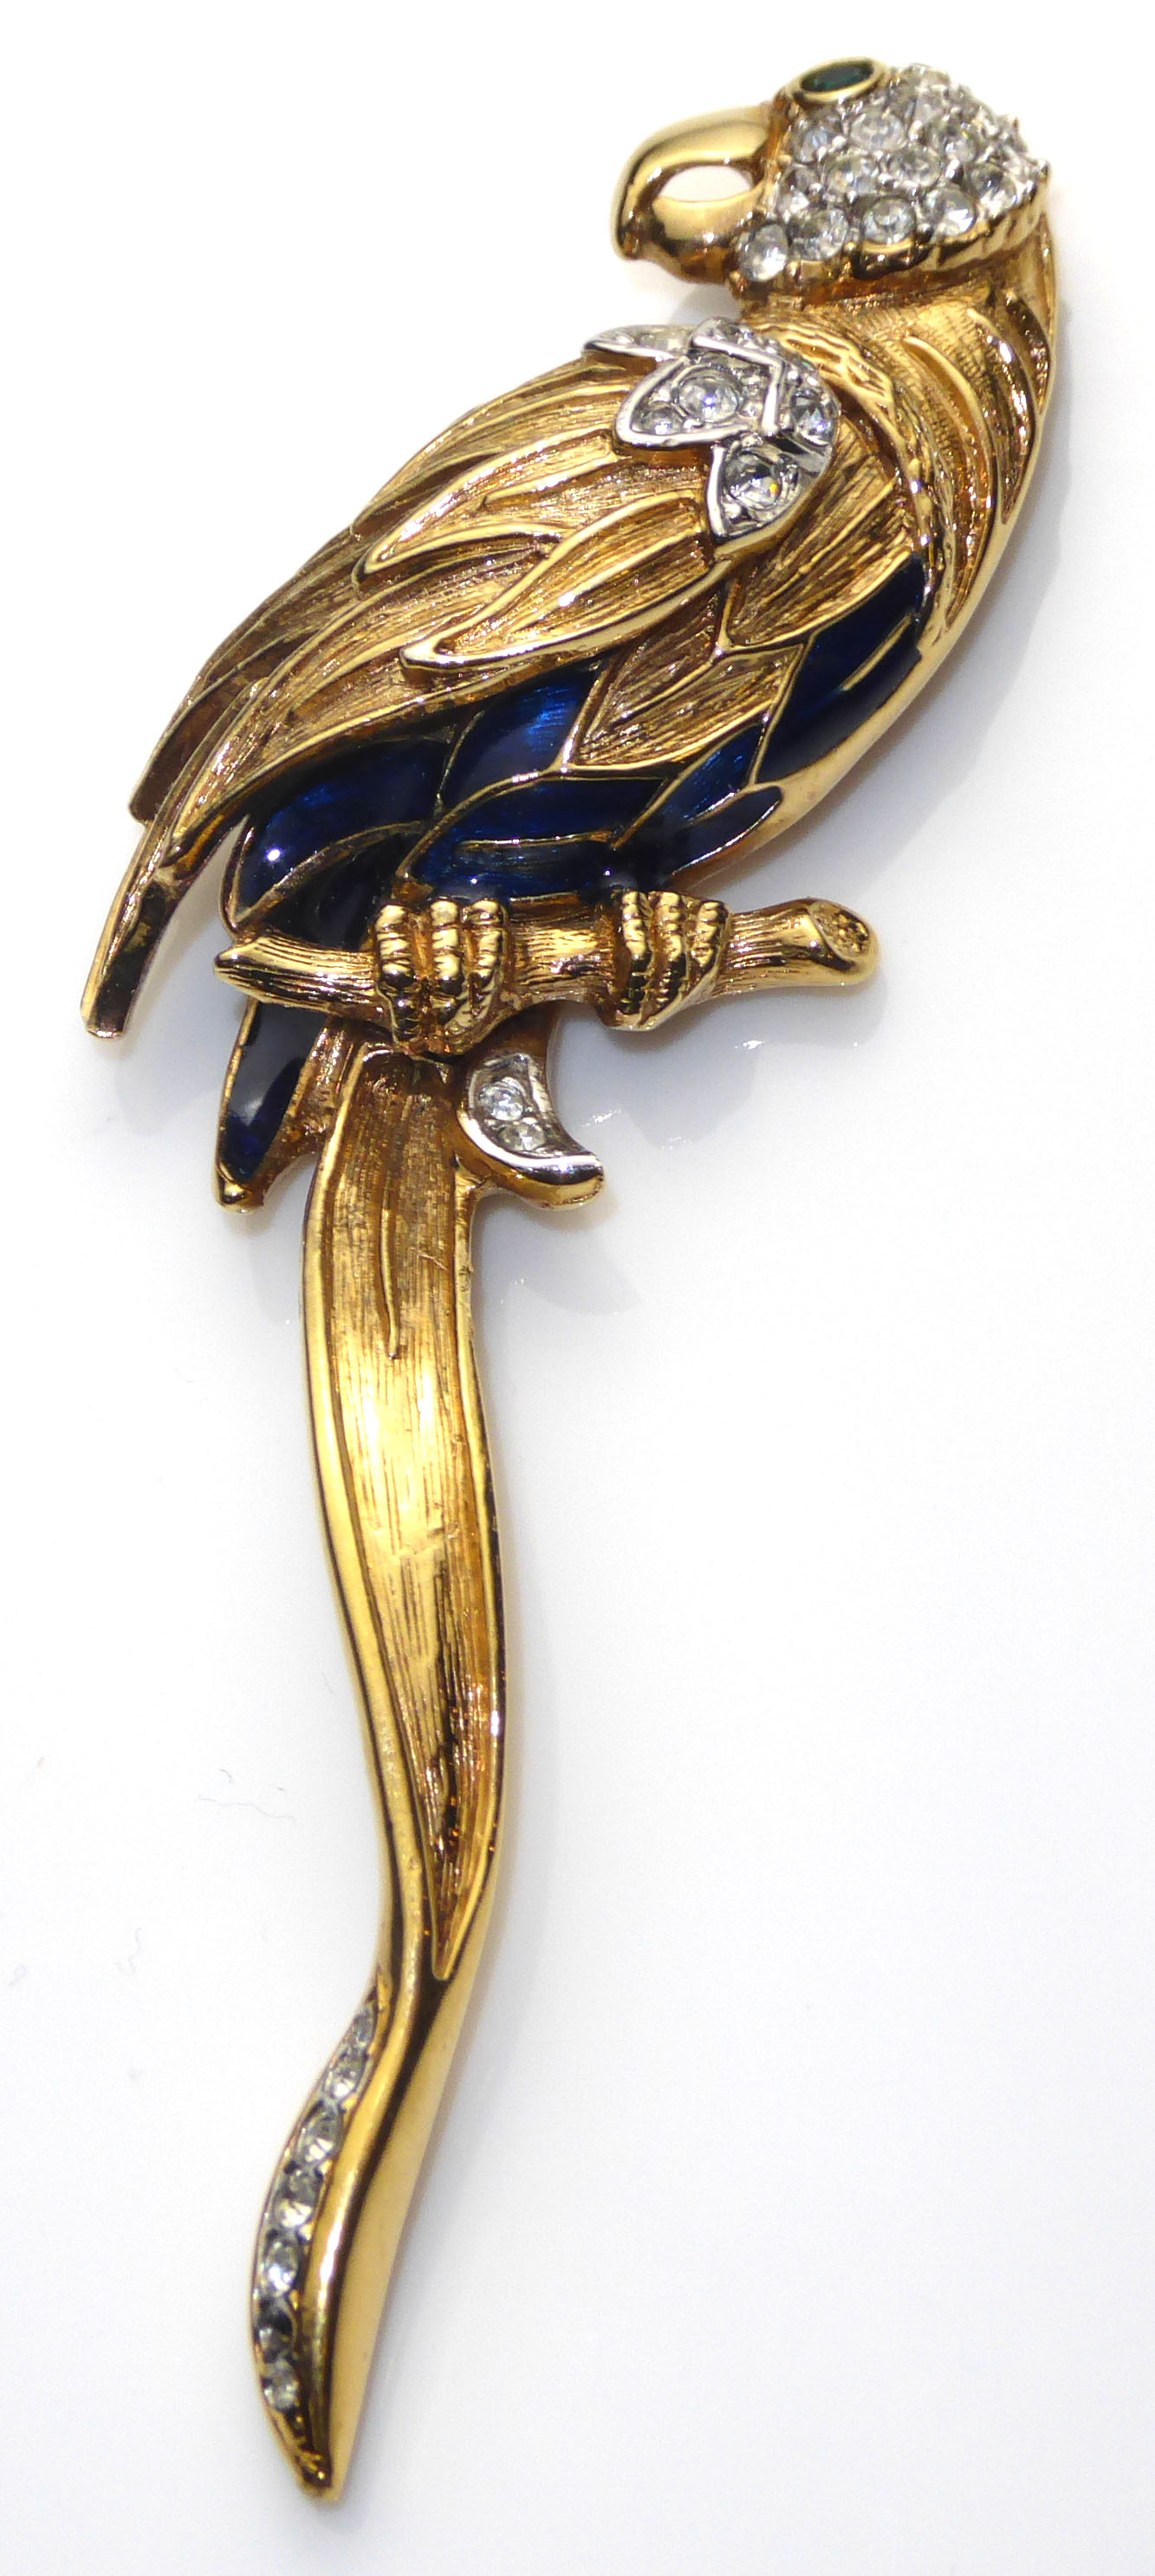 A 20TH CENTURY GOLD PLATED, ENAMEL AND PASTE SET PARROT BROOCH Perched on a branch with blue